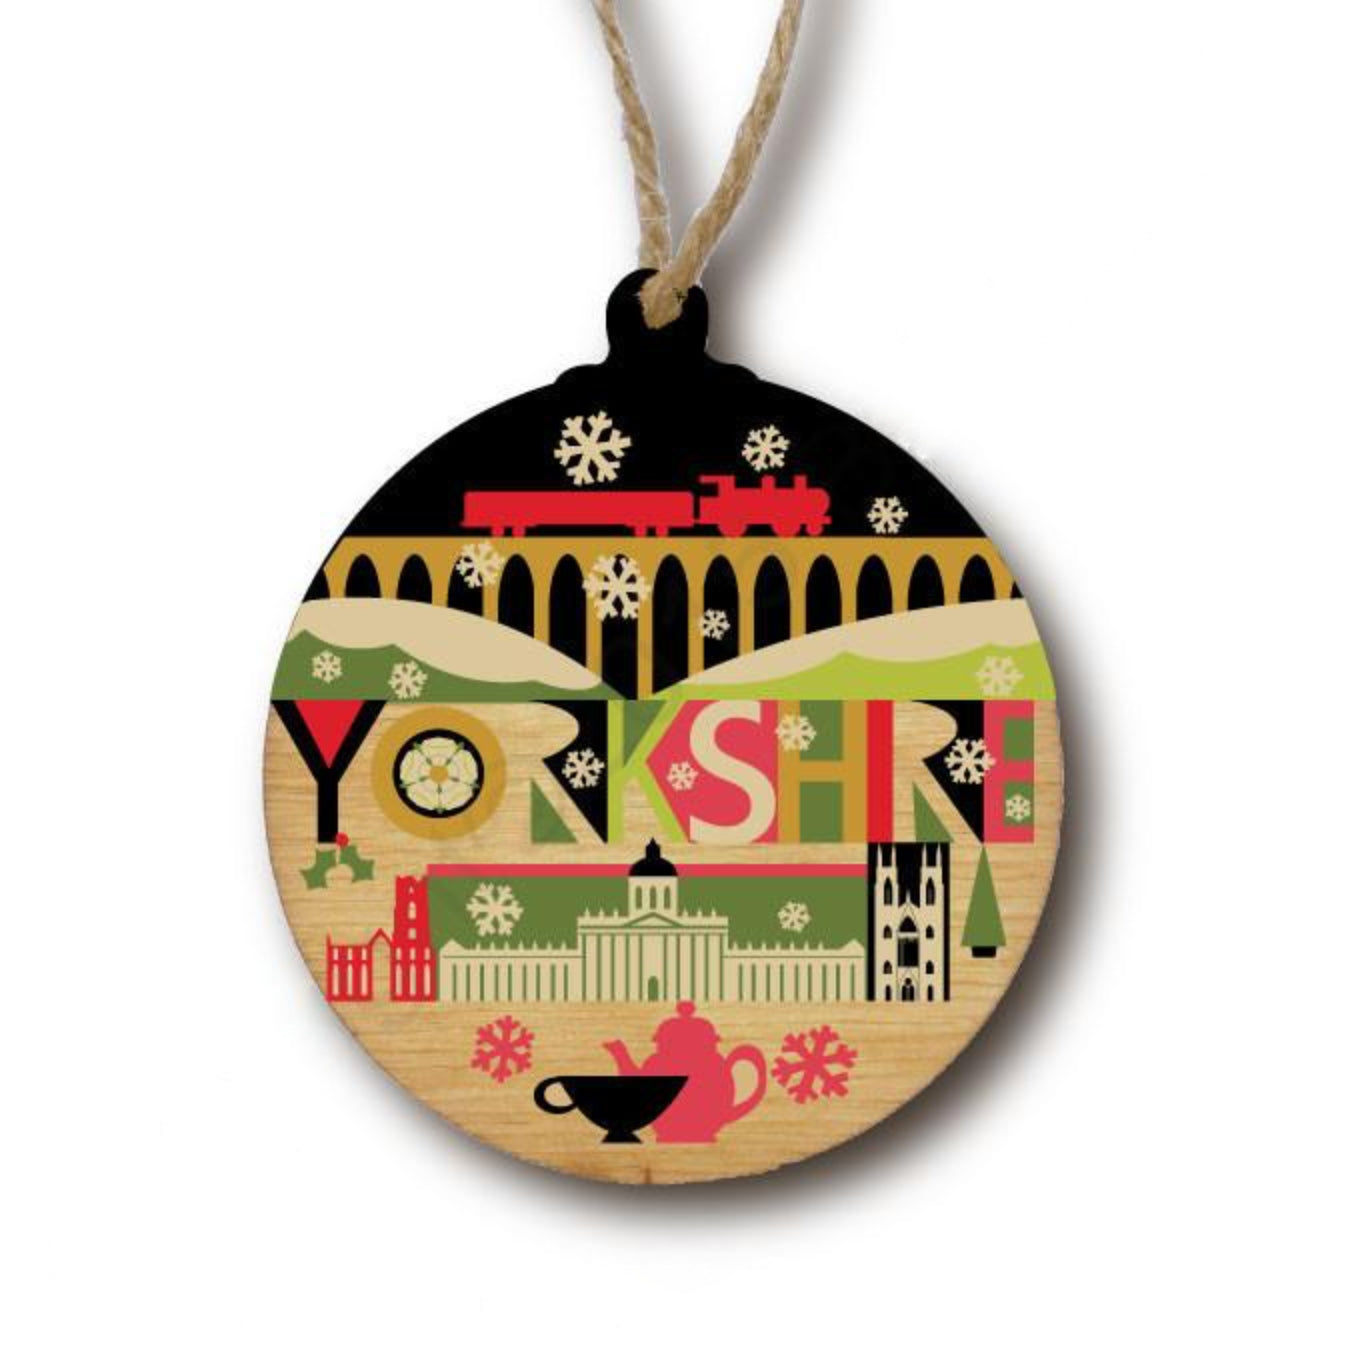 Yorkshire Scape Rustic Wooden Christmas Decoration - The Great Yorkshire Shop